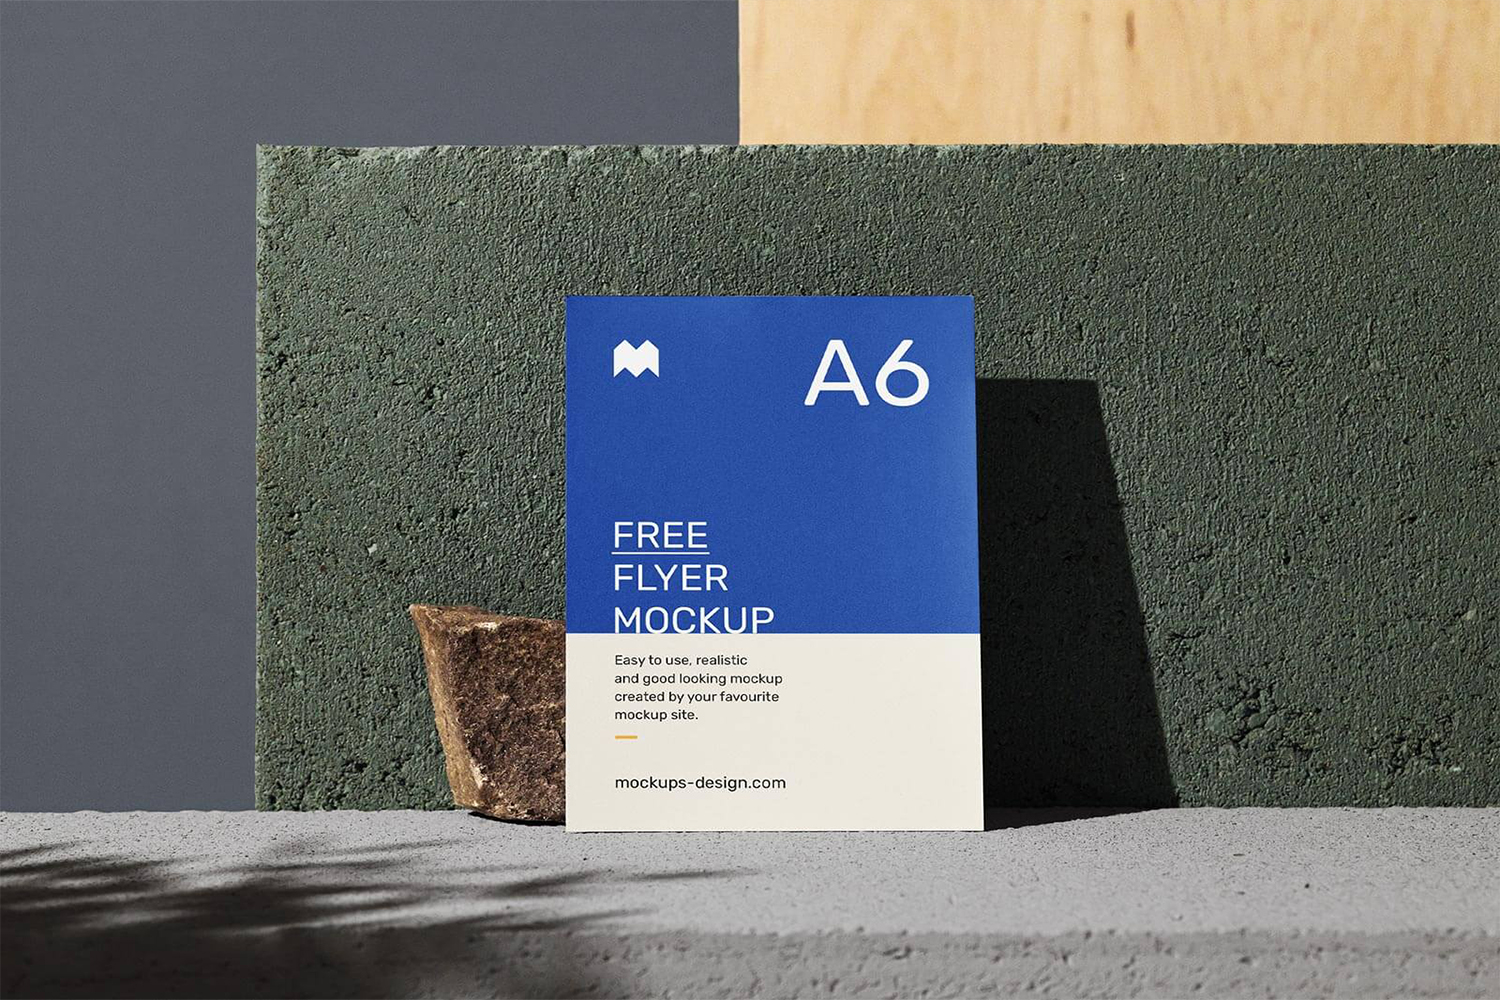 6 Flyer Mockup PSD With Stones Free Download